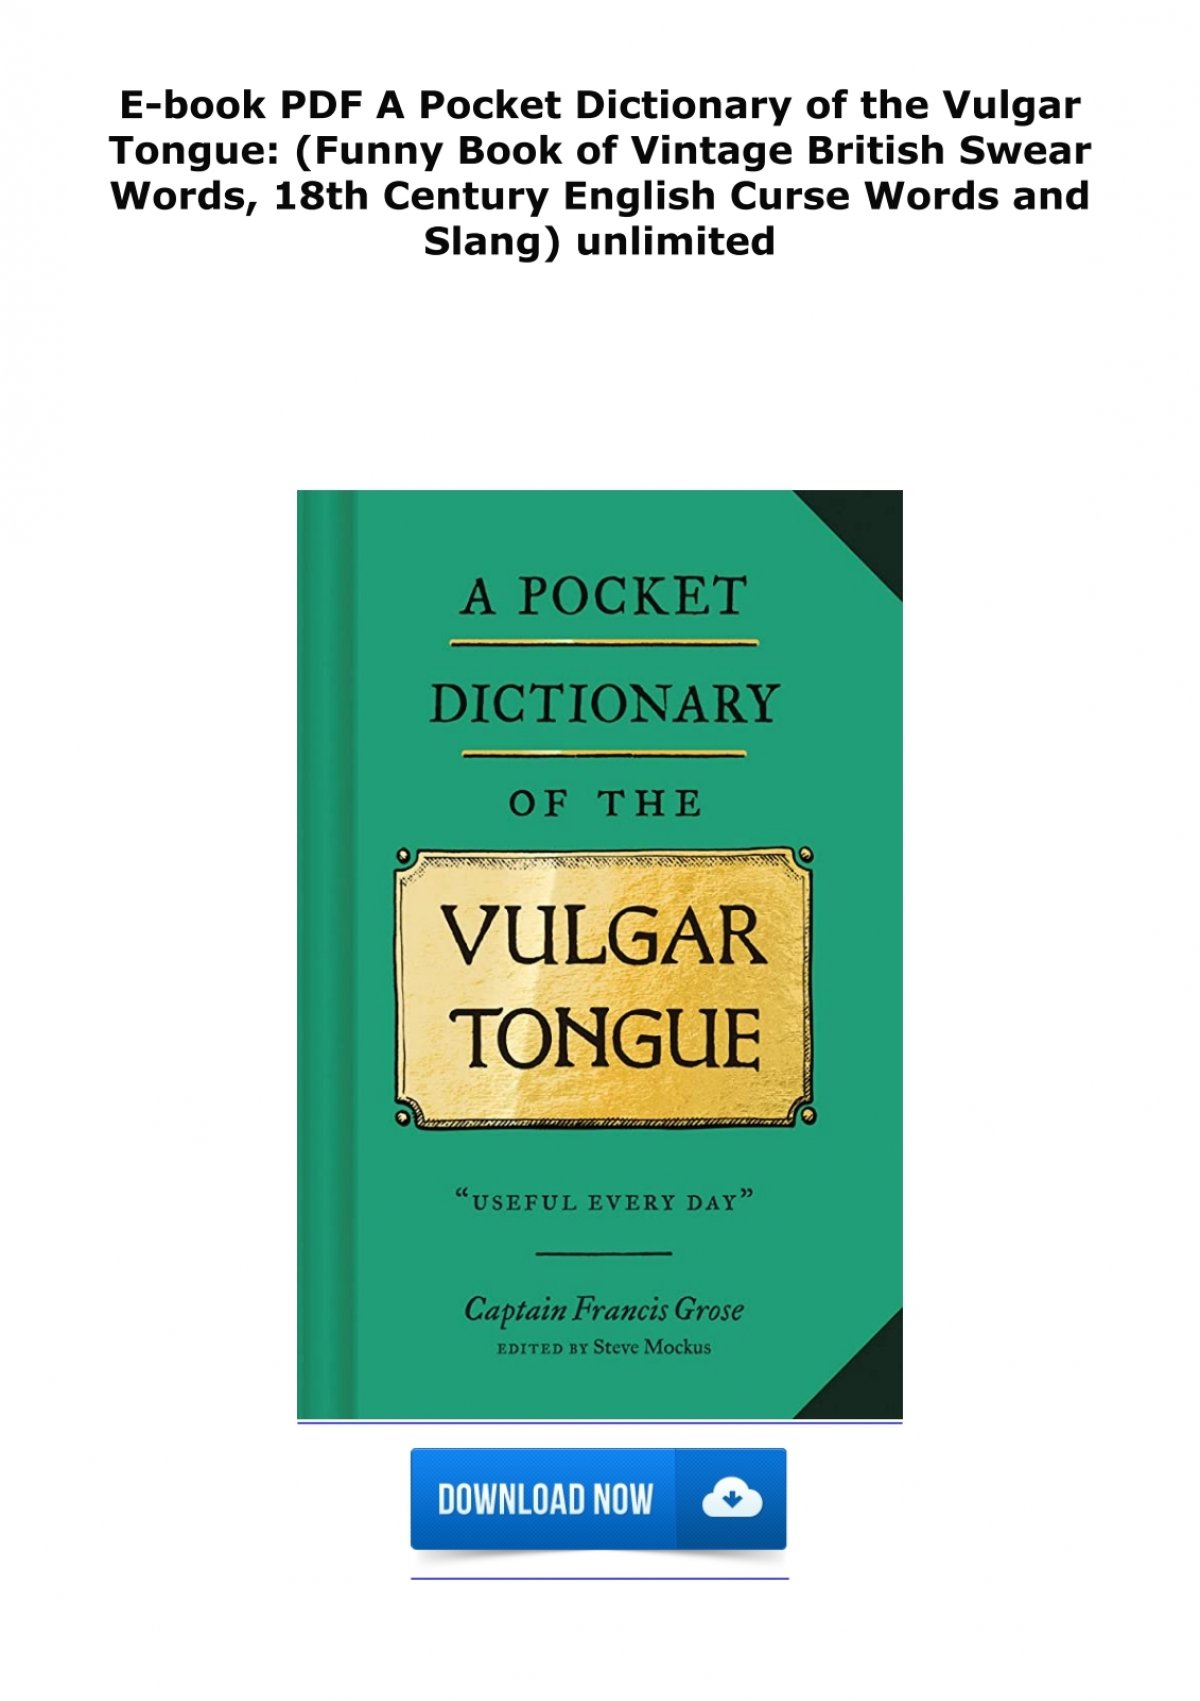 E Book Pdf A Pocket Dictionary Of The Vulgar Tongue Funny Book Of Vintage British Swear Words 